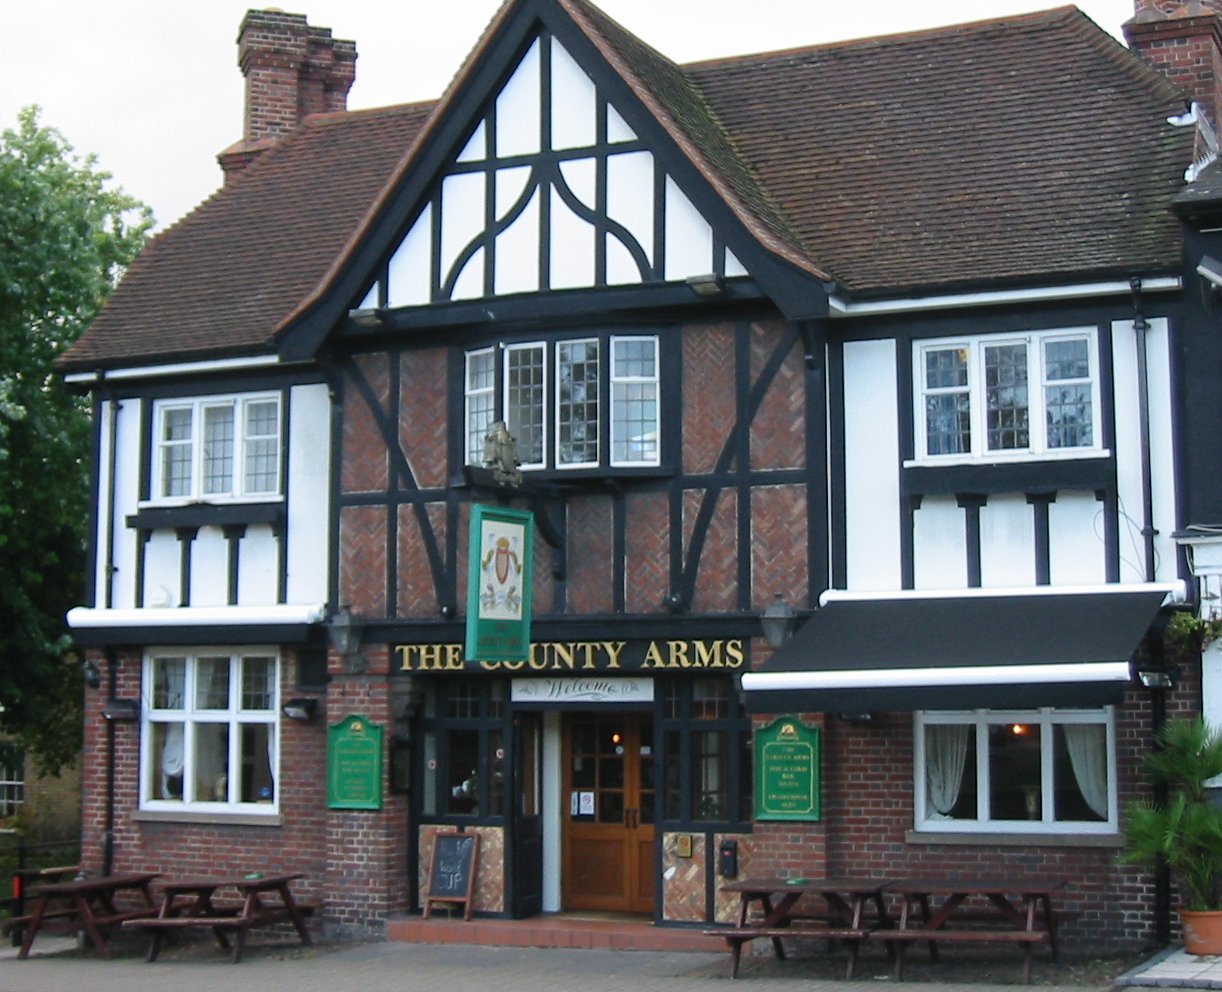 the entrance of the country arms pub in an old style